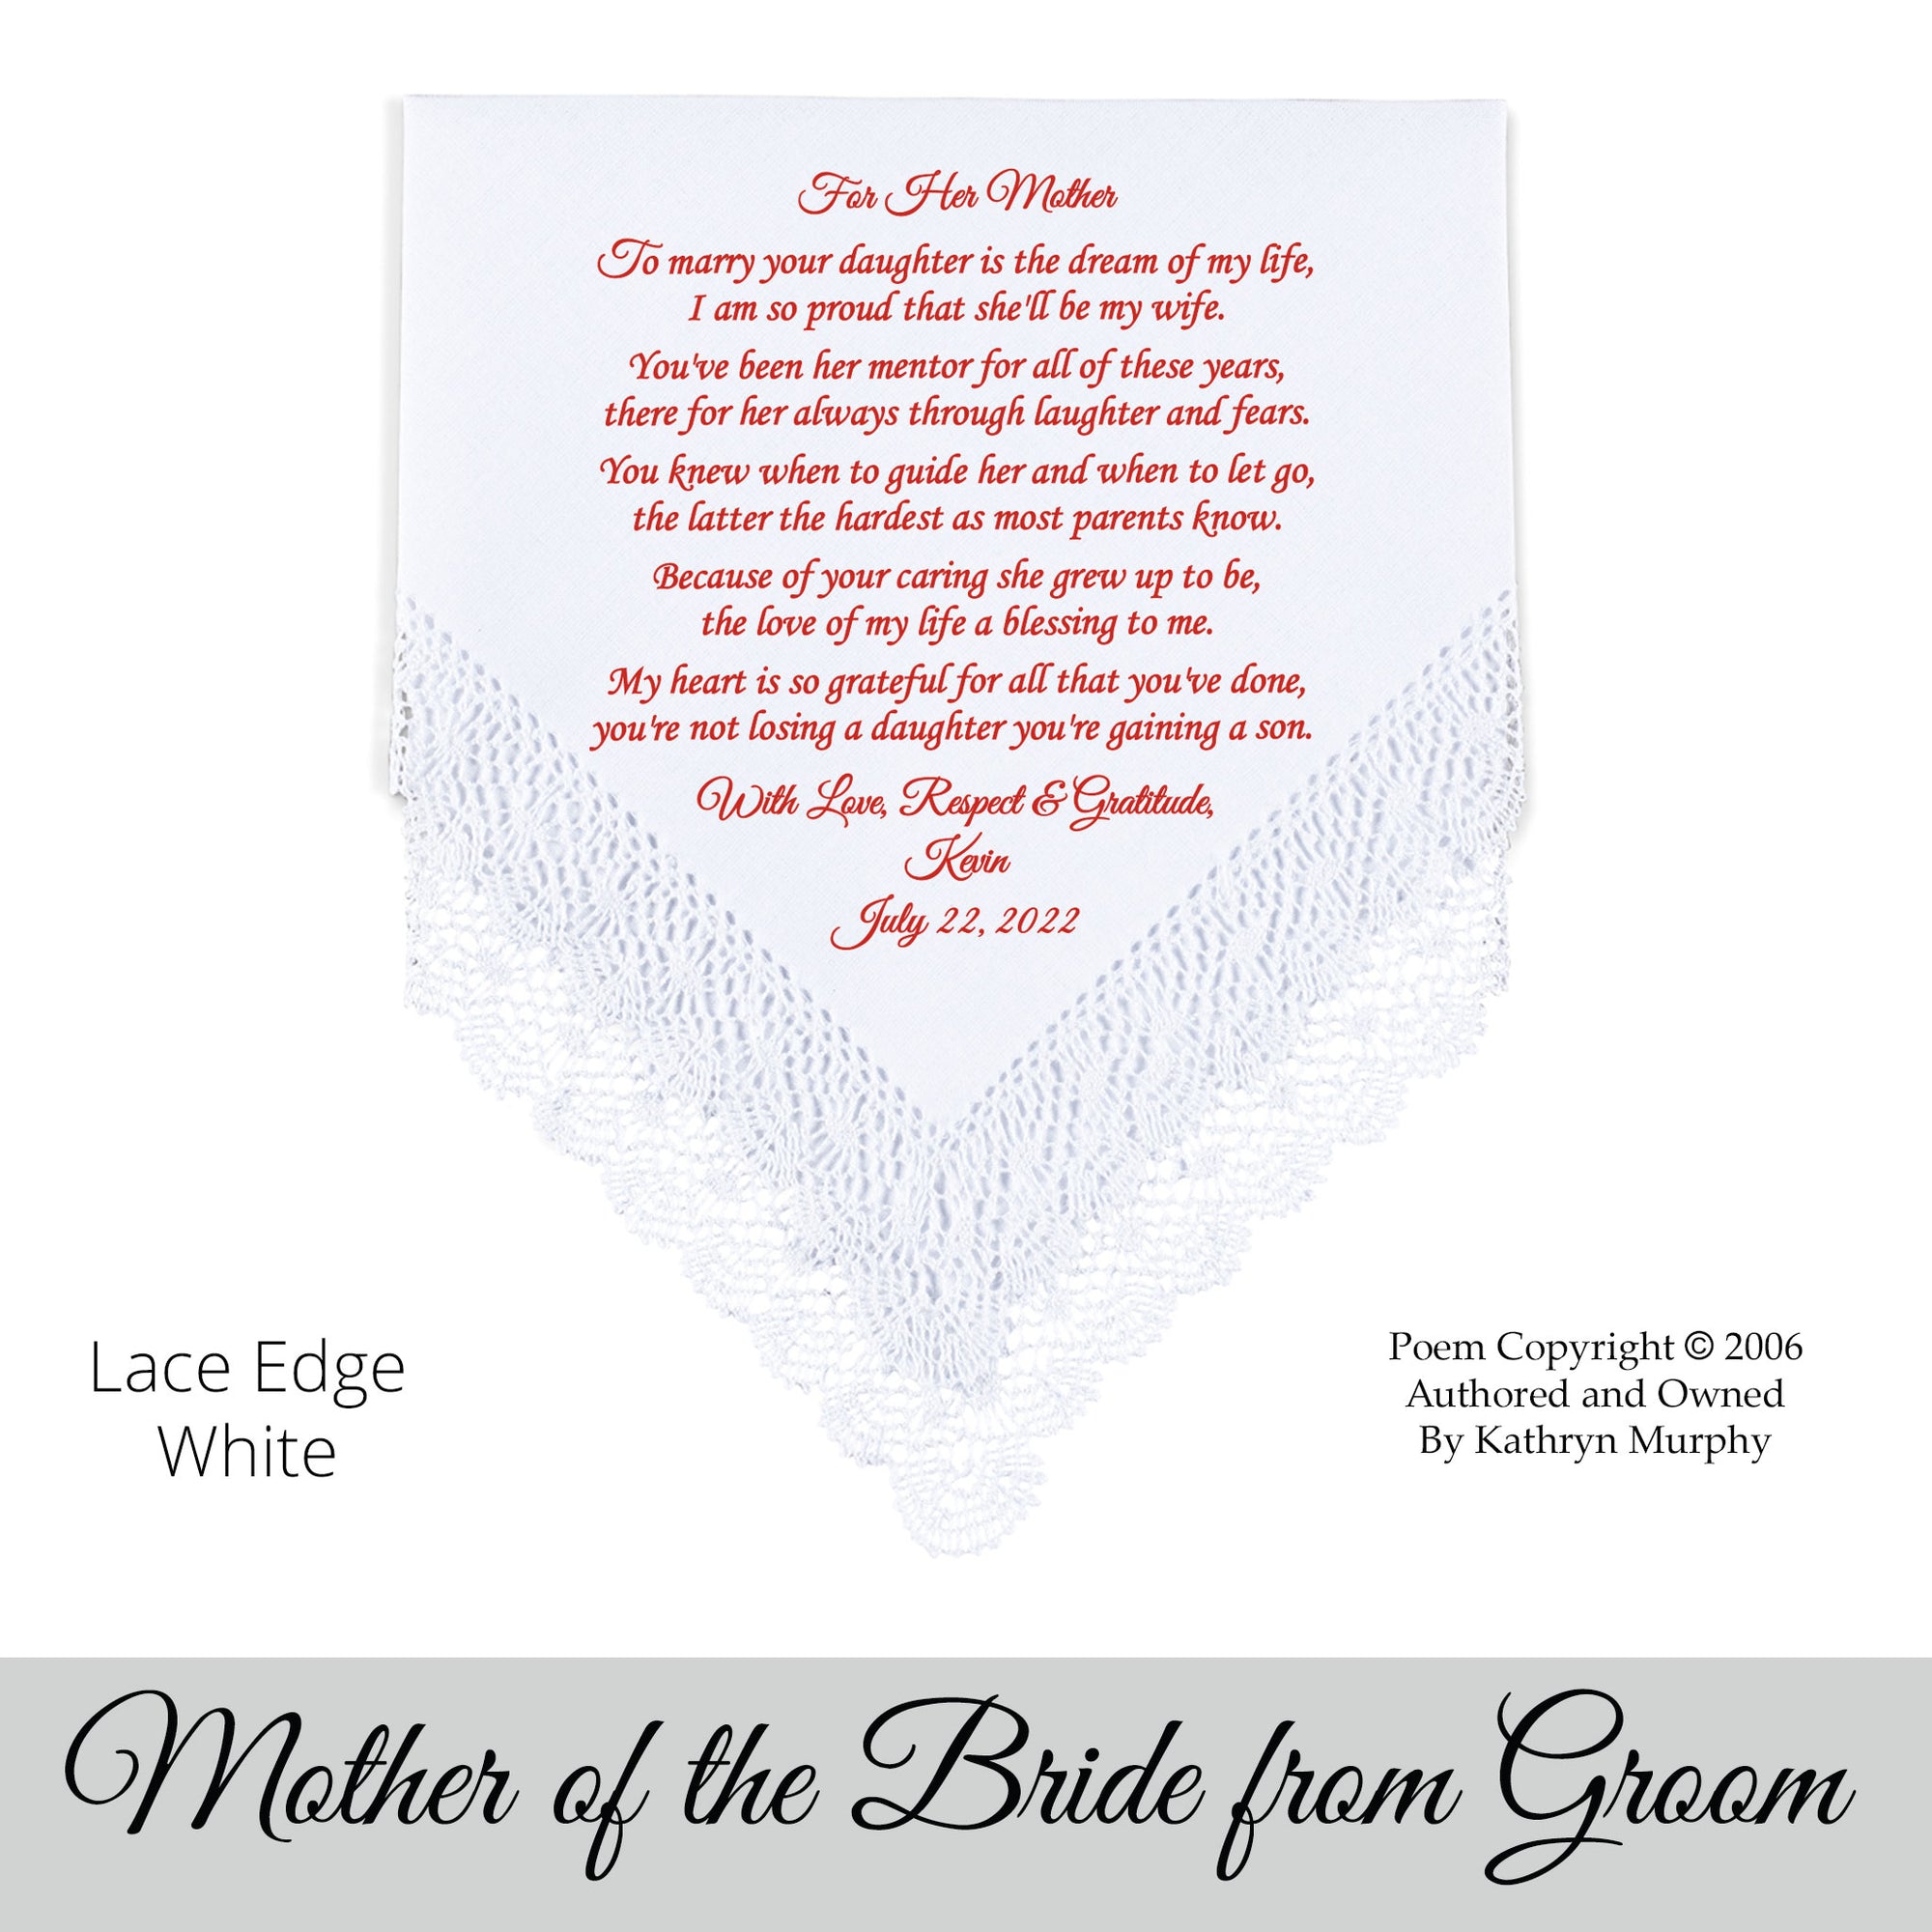 gift for the mother of the bride. Wedding Hankie with printed poem from the groom